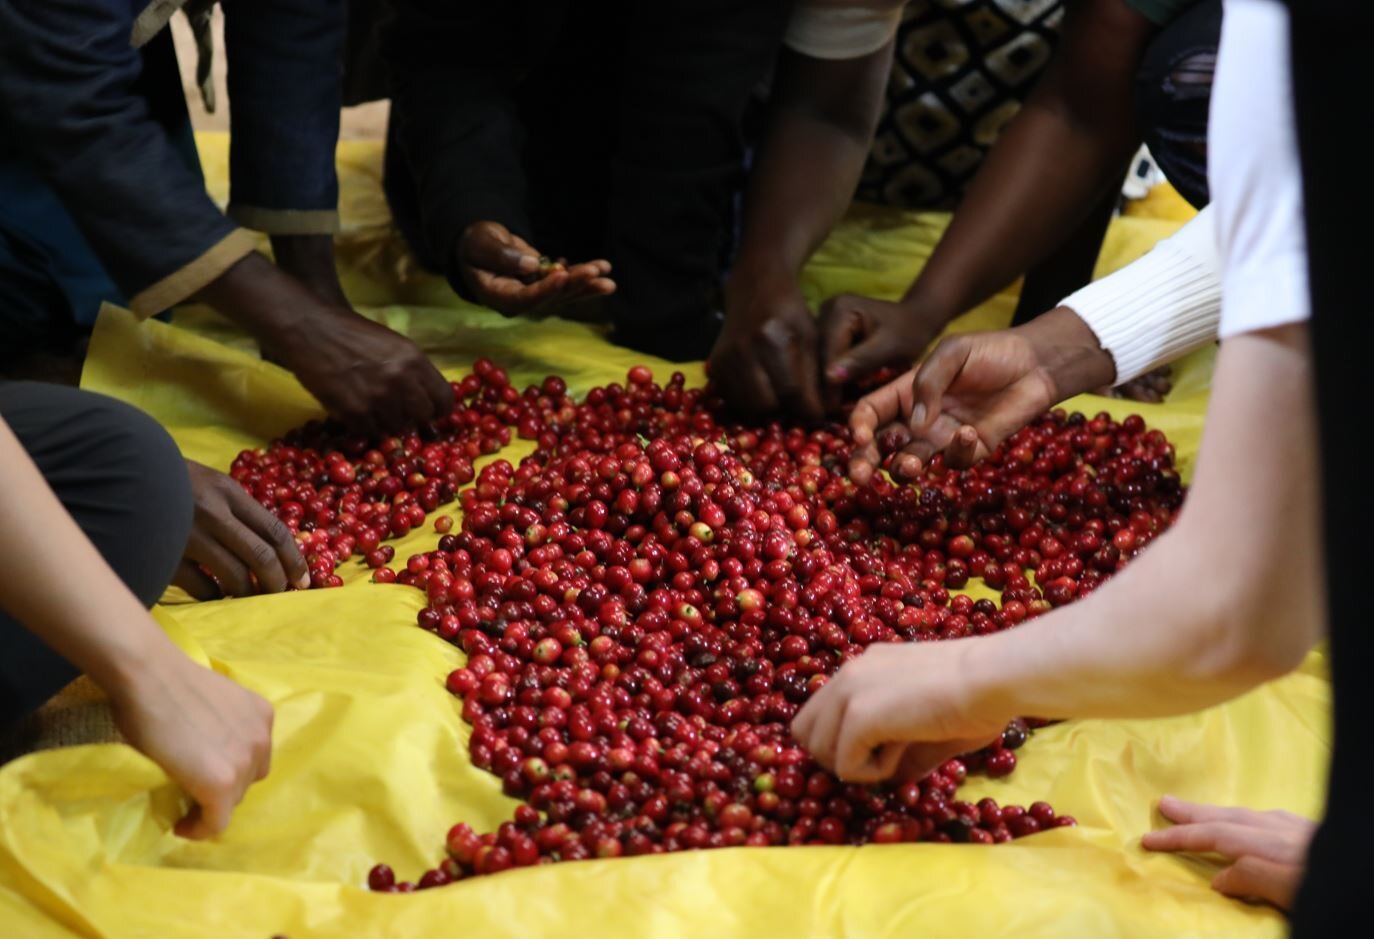 After picking, we go through a rigorous process of sorting the unripe cherries from the ripe cherries. This is to give optimal sweetness in the cup. It's like eating a slightly green strawberry rather than a bright red ripe one we all know which one 